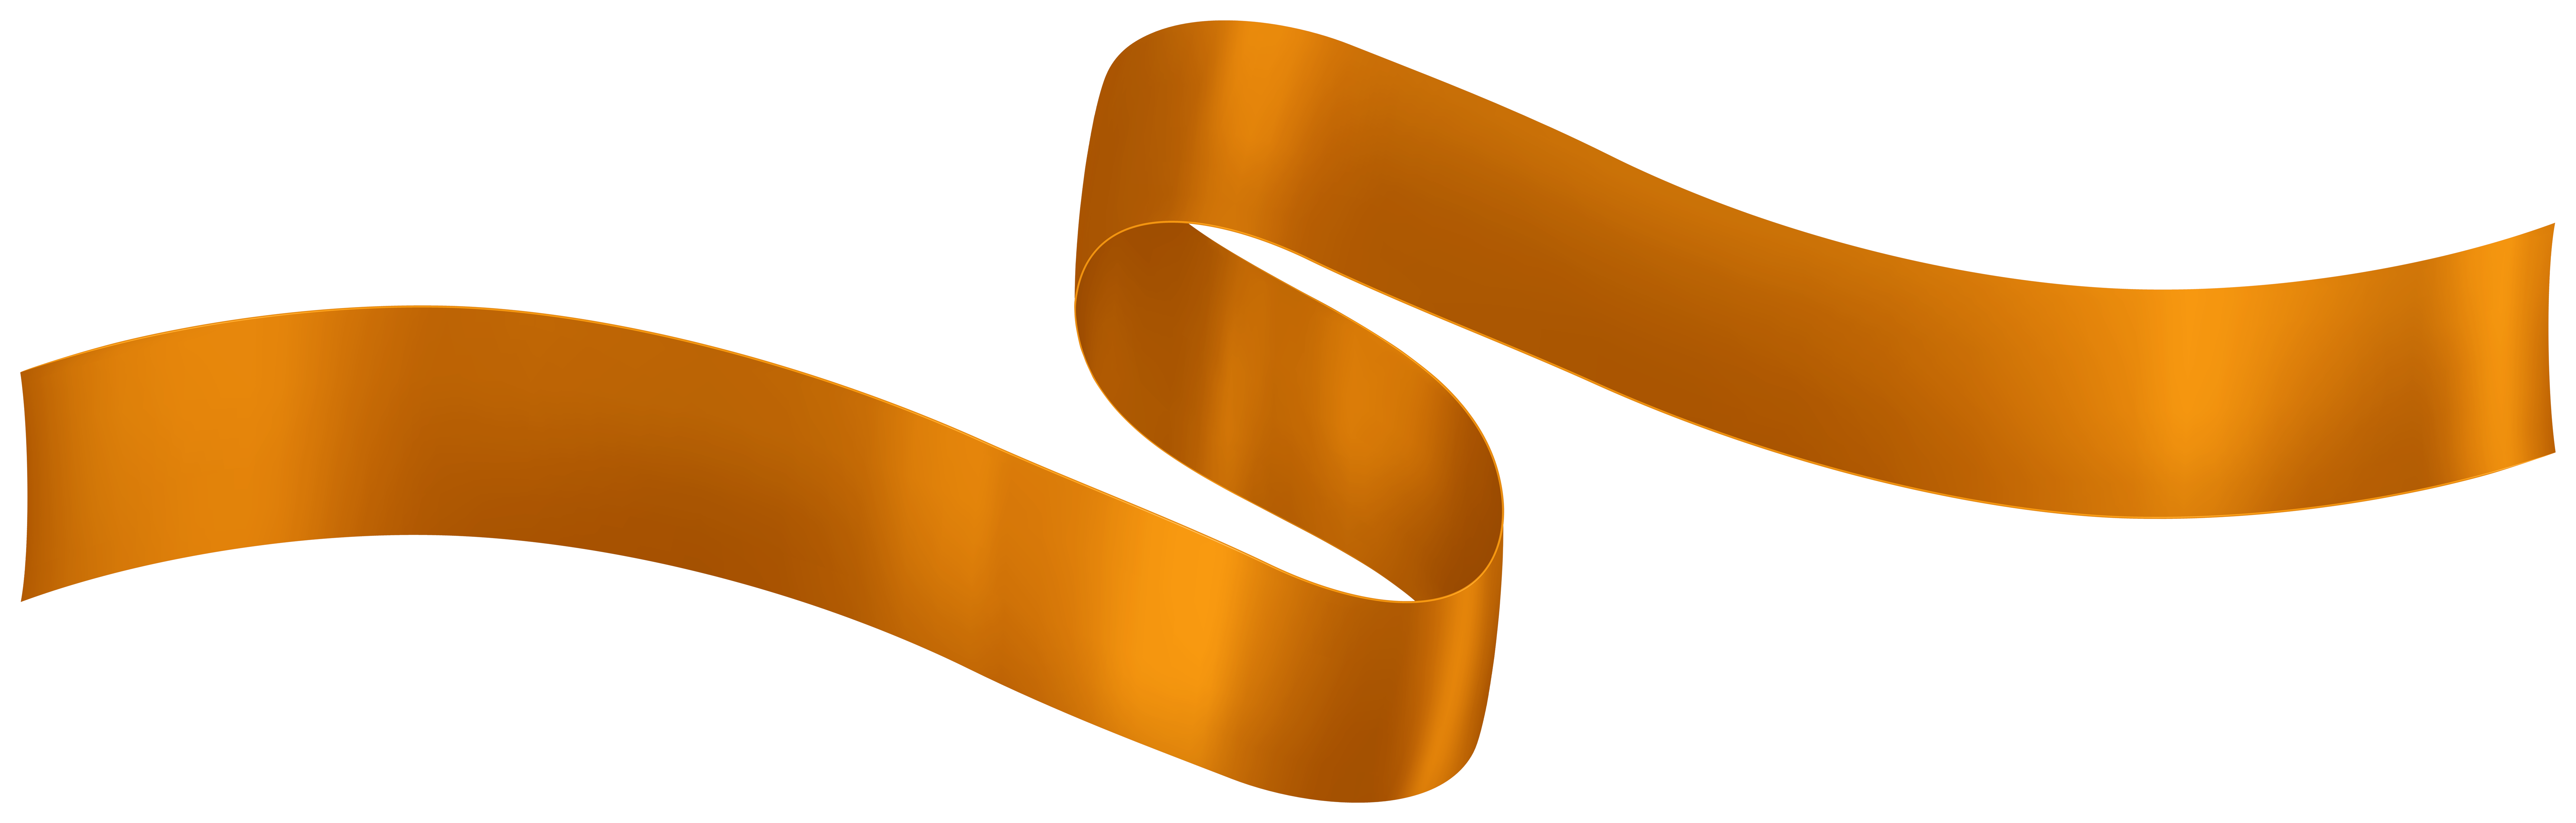 Ribbon Orange PNG Clipart​  Gallery Yopriceville - High-Quality Free  Images and Transparent PNG Clipart